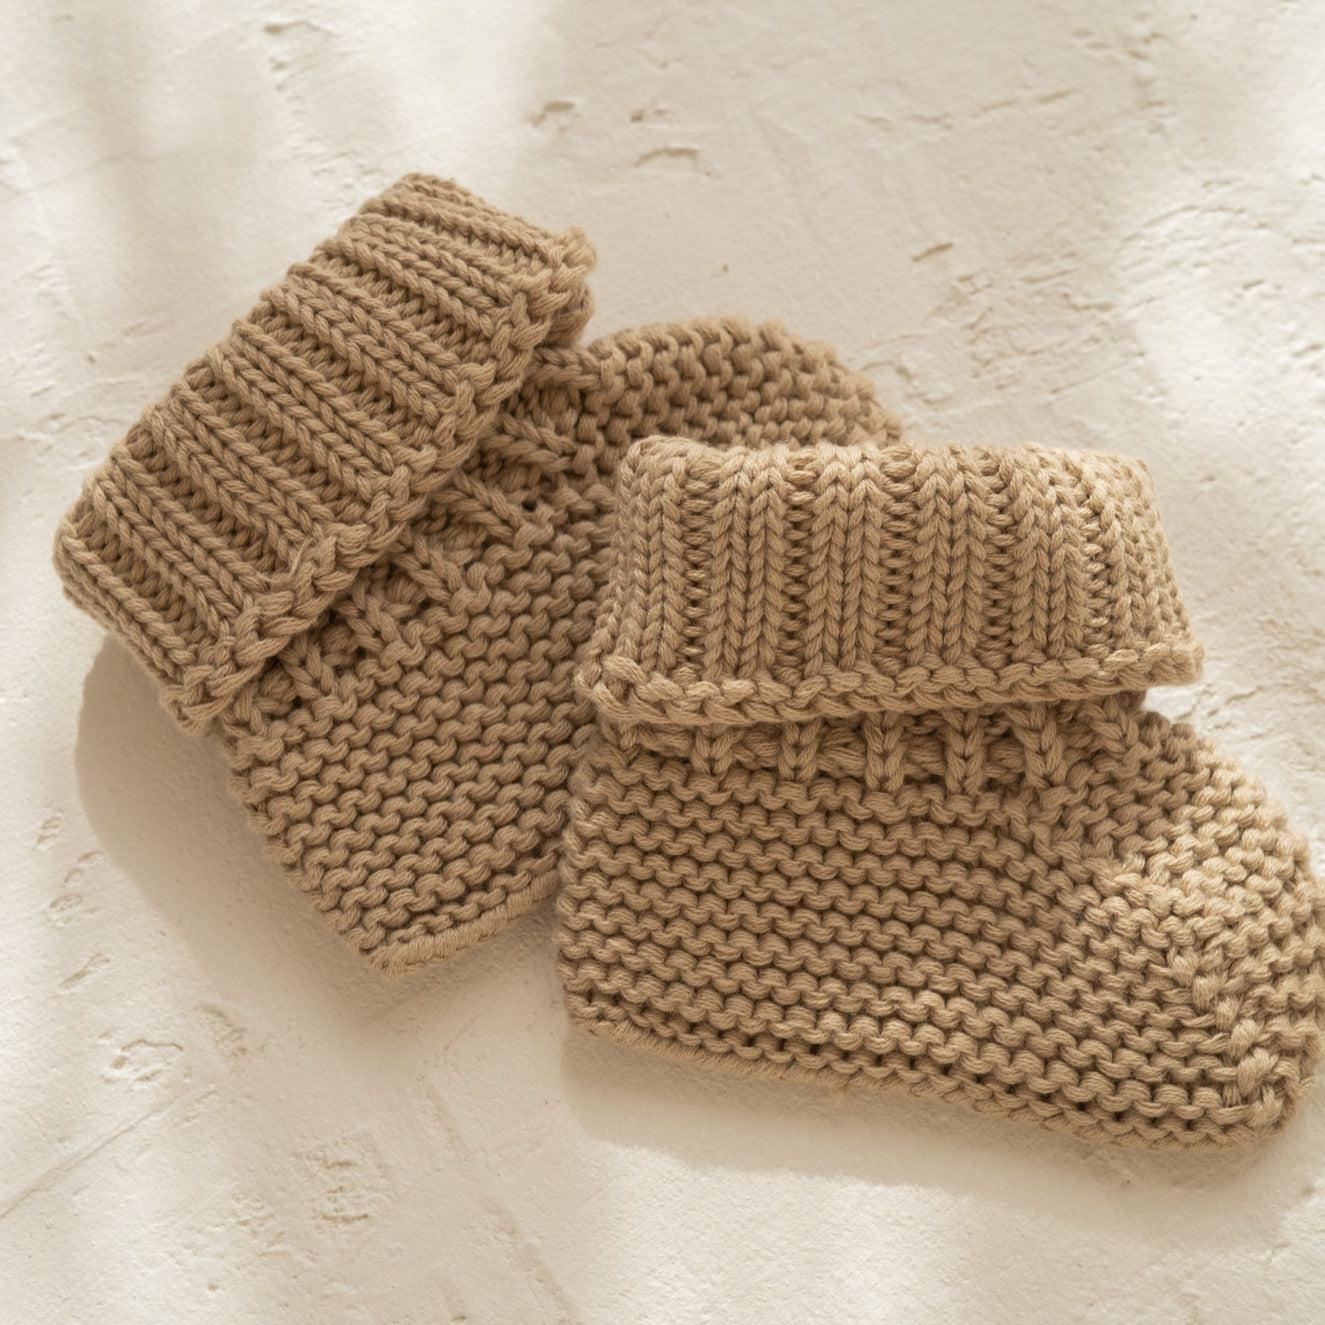 Two Illoura the Label organic cotton booties for babies on a white surface.